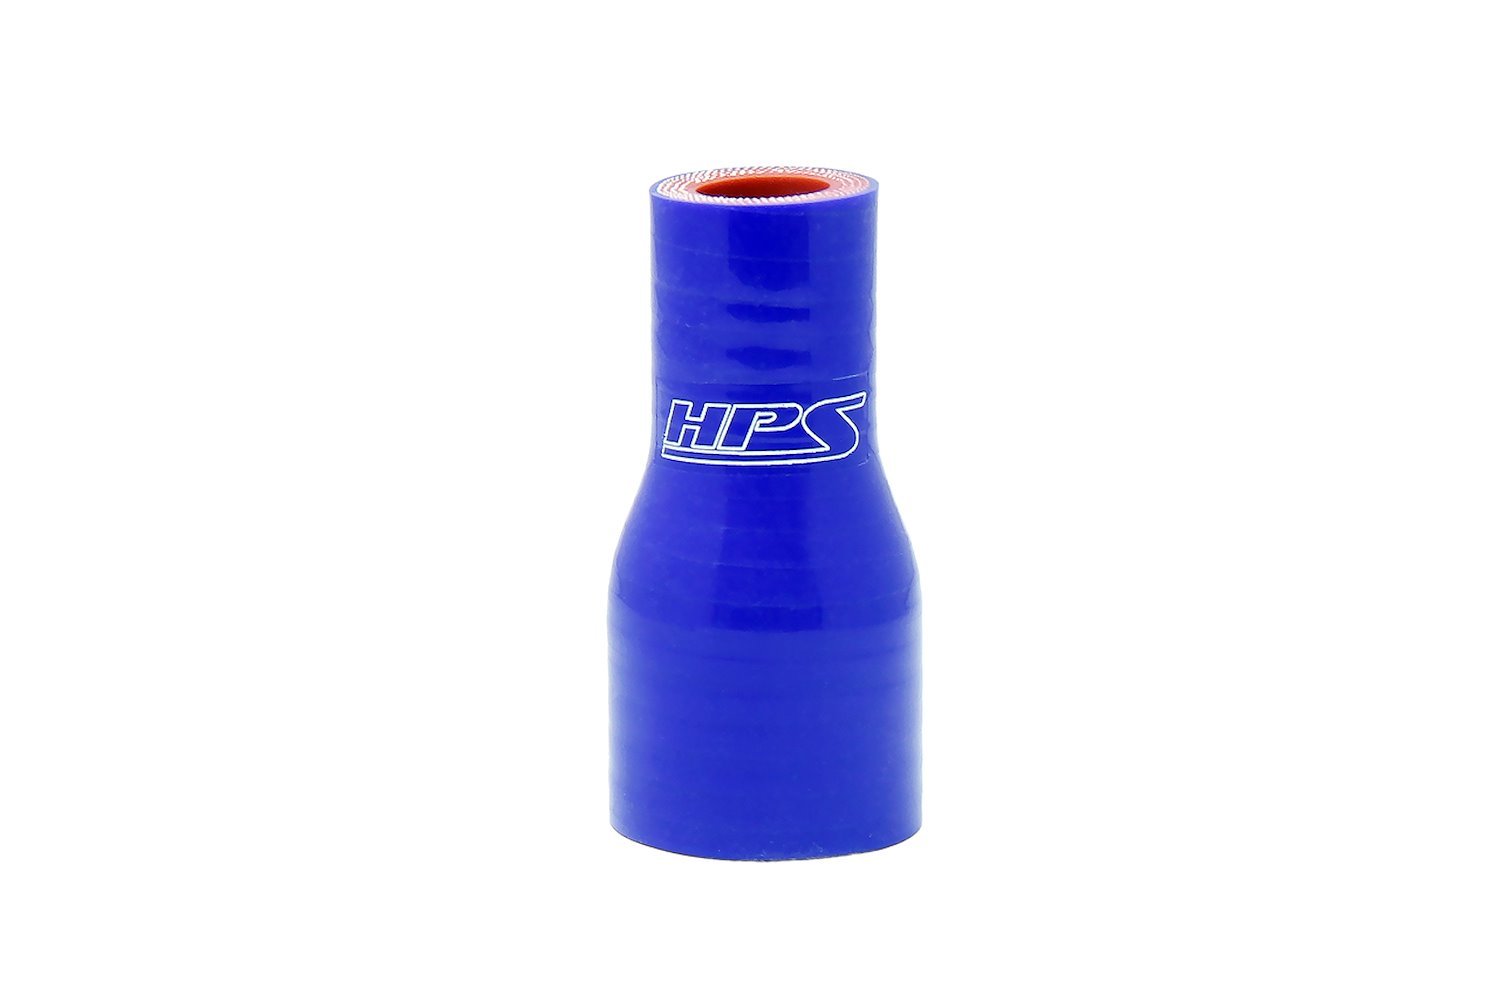 HTSR-100-138-L4-BLUE Silicone Reducer Hose, High-Temp 4-Ply Reinforced, 1 in. - 1-3/8 in. ID, 4 in. Long, Blue